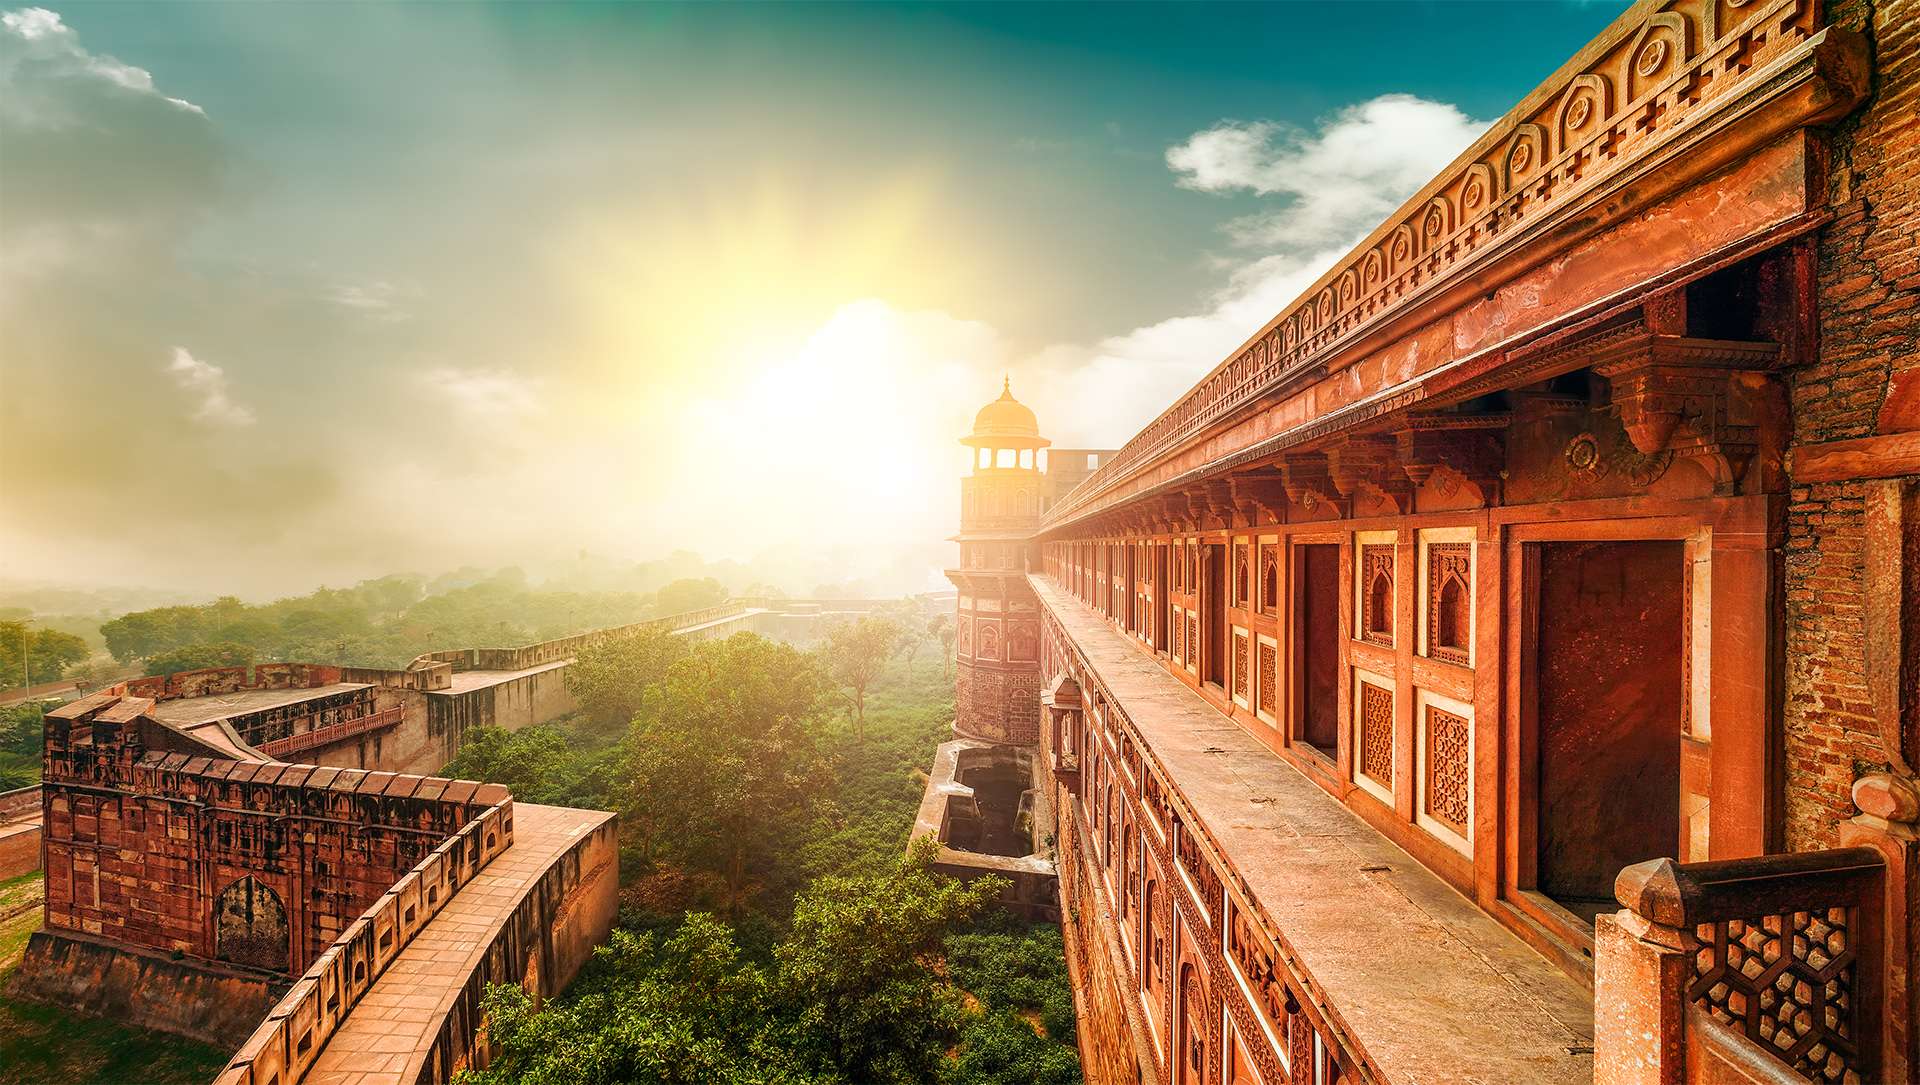 Agra Fort, is a monument, a UNESCO World Heritage site located in Agra, Uttar Pradesh, India. The fort can be more accurately described as a walled city.